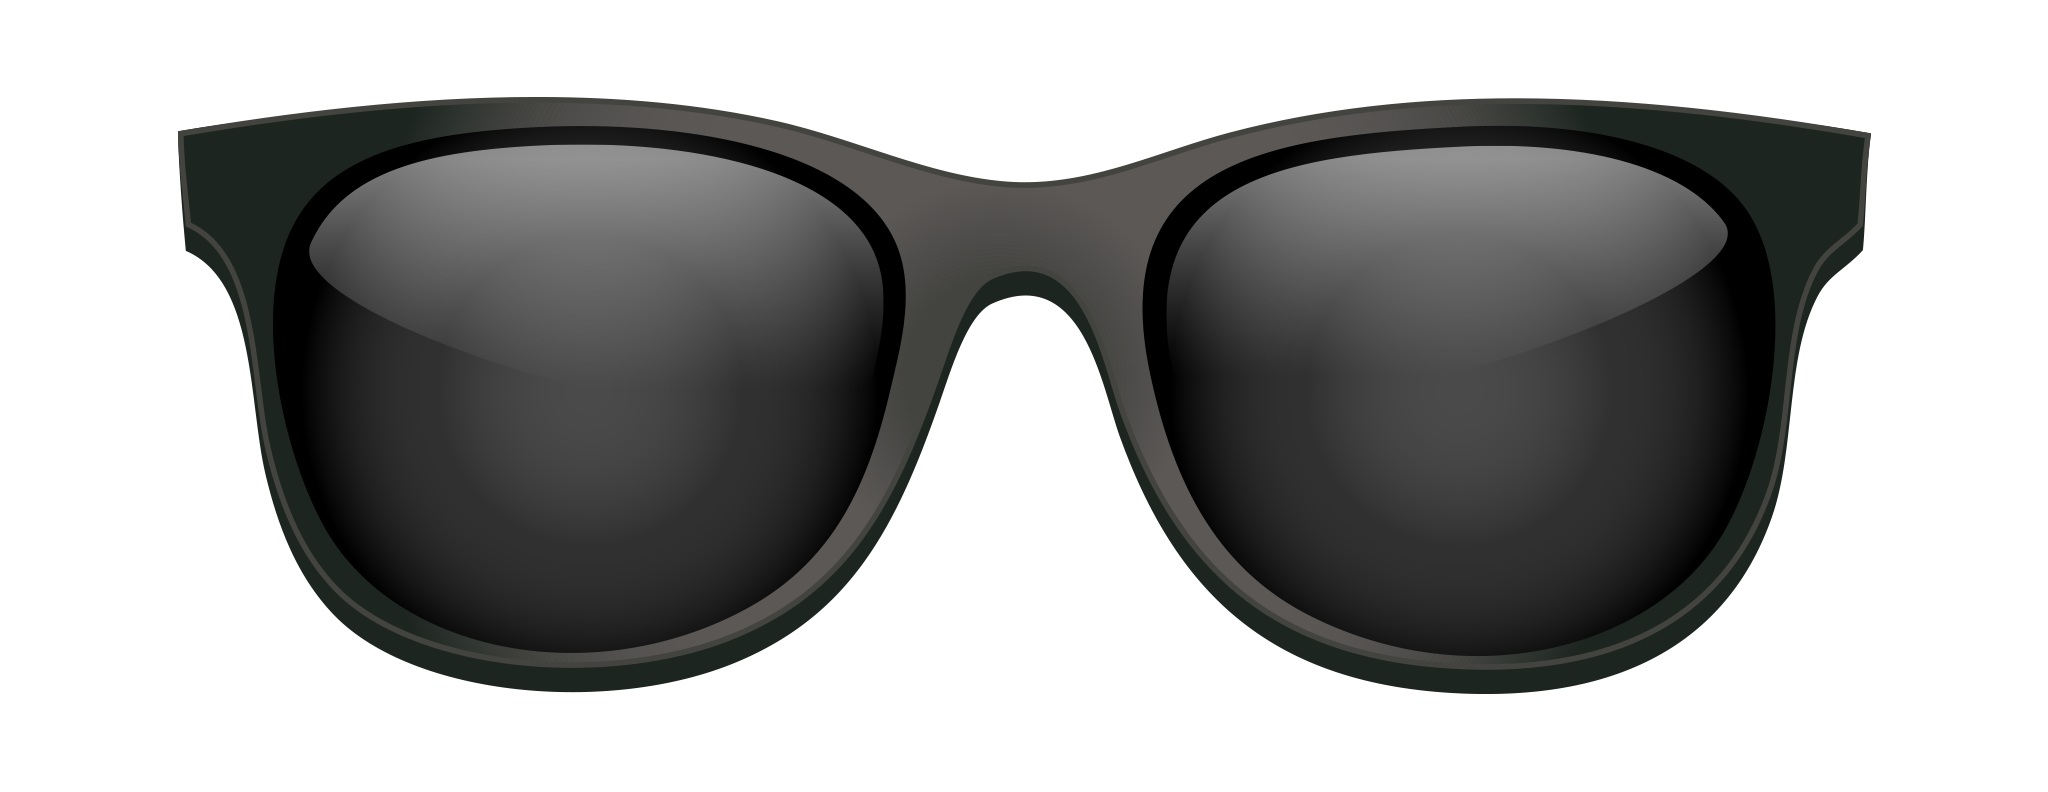 Download PNG image - Picart Sunglasses PNG Picture 